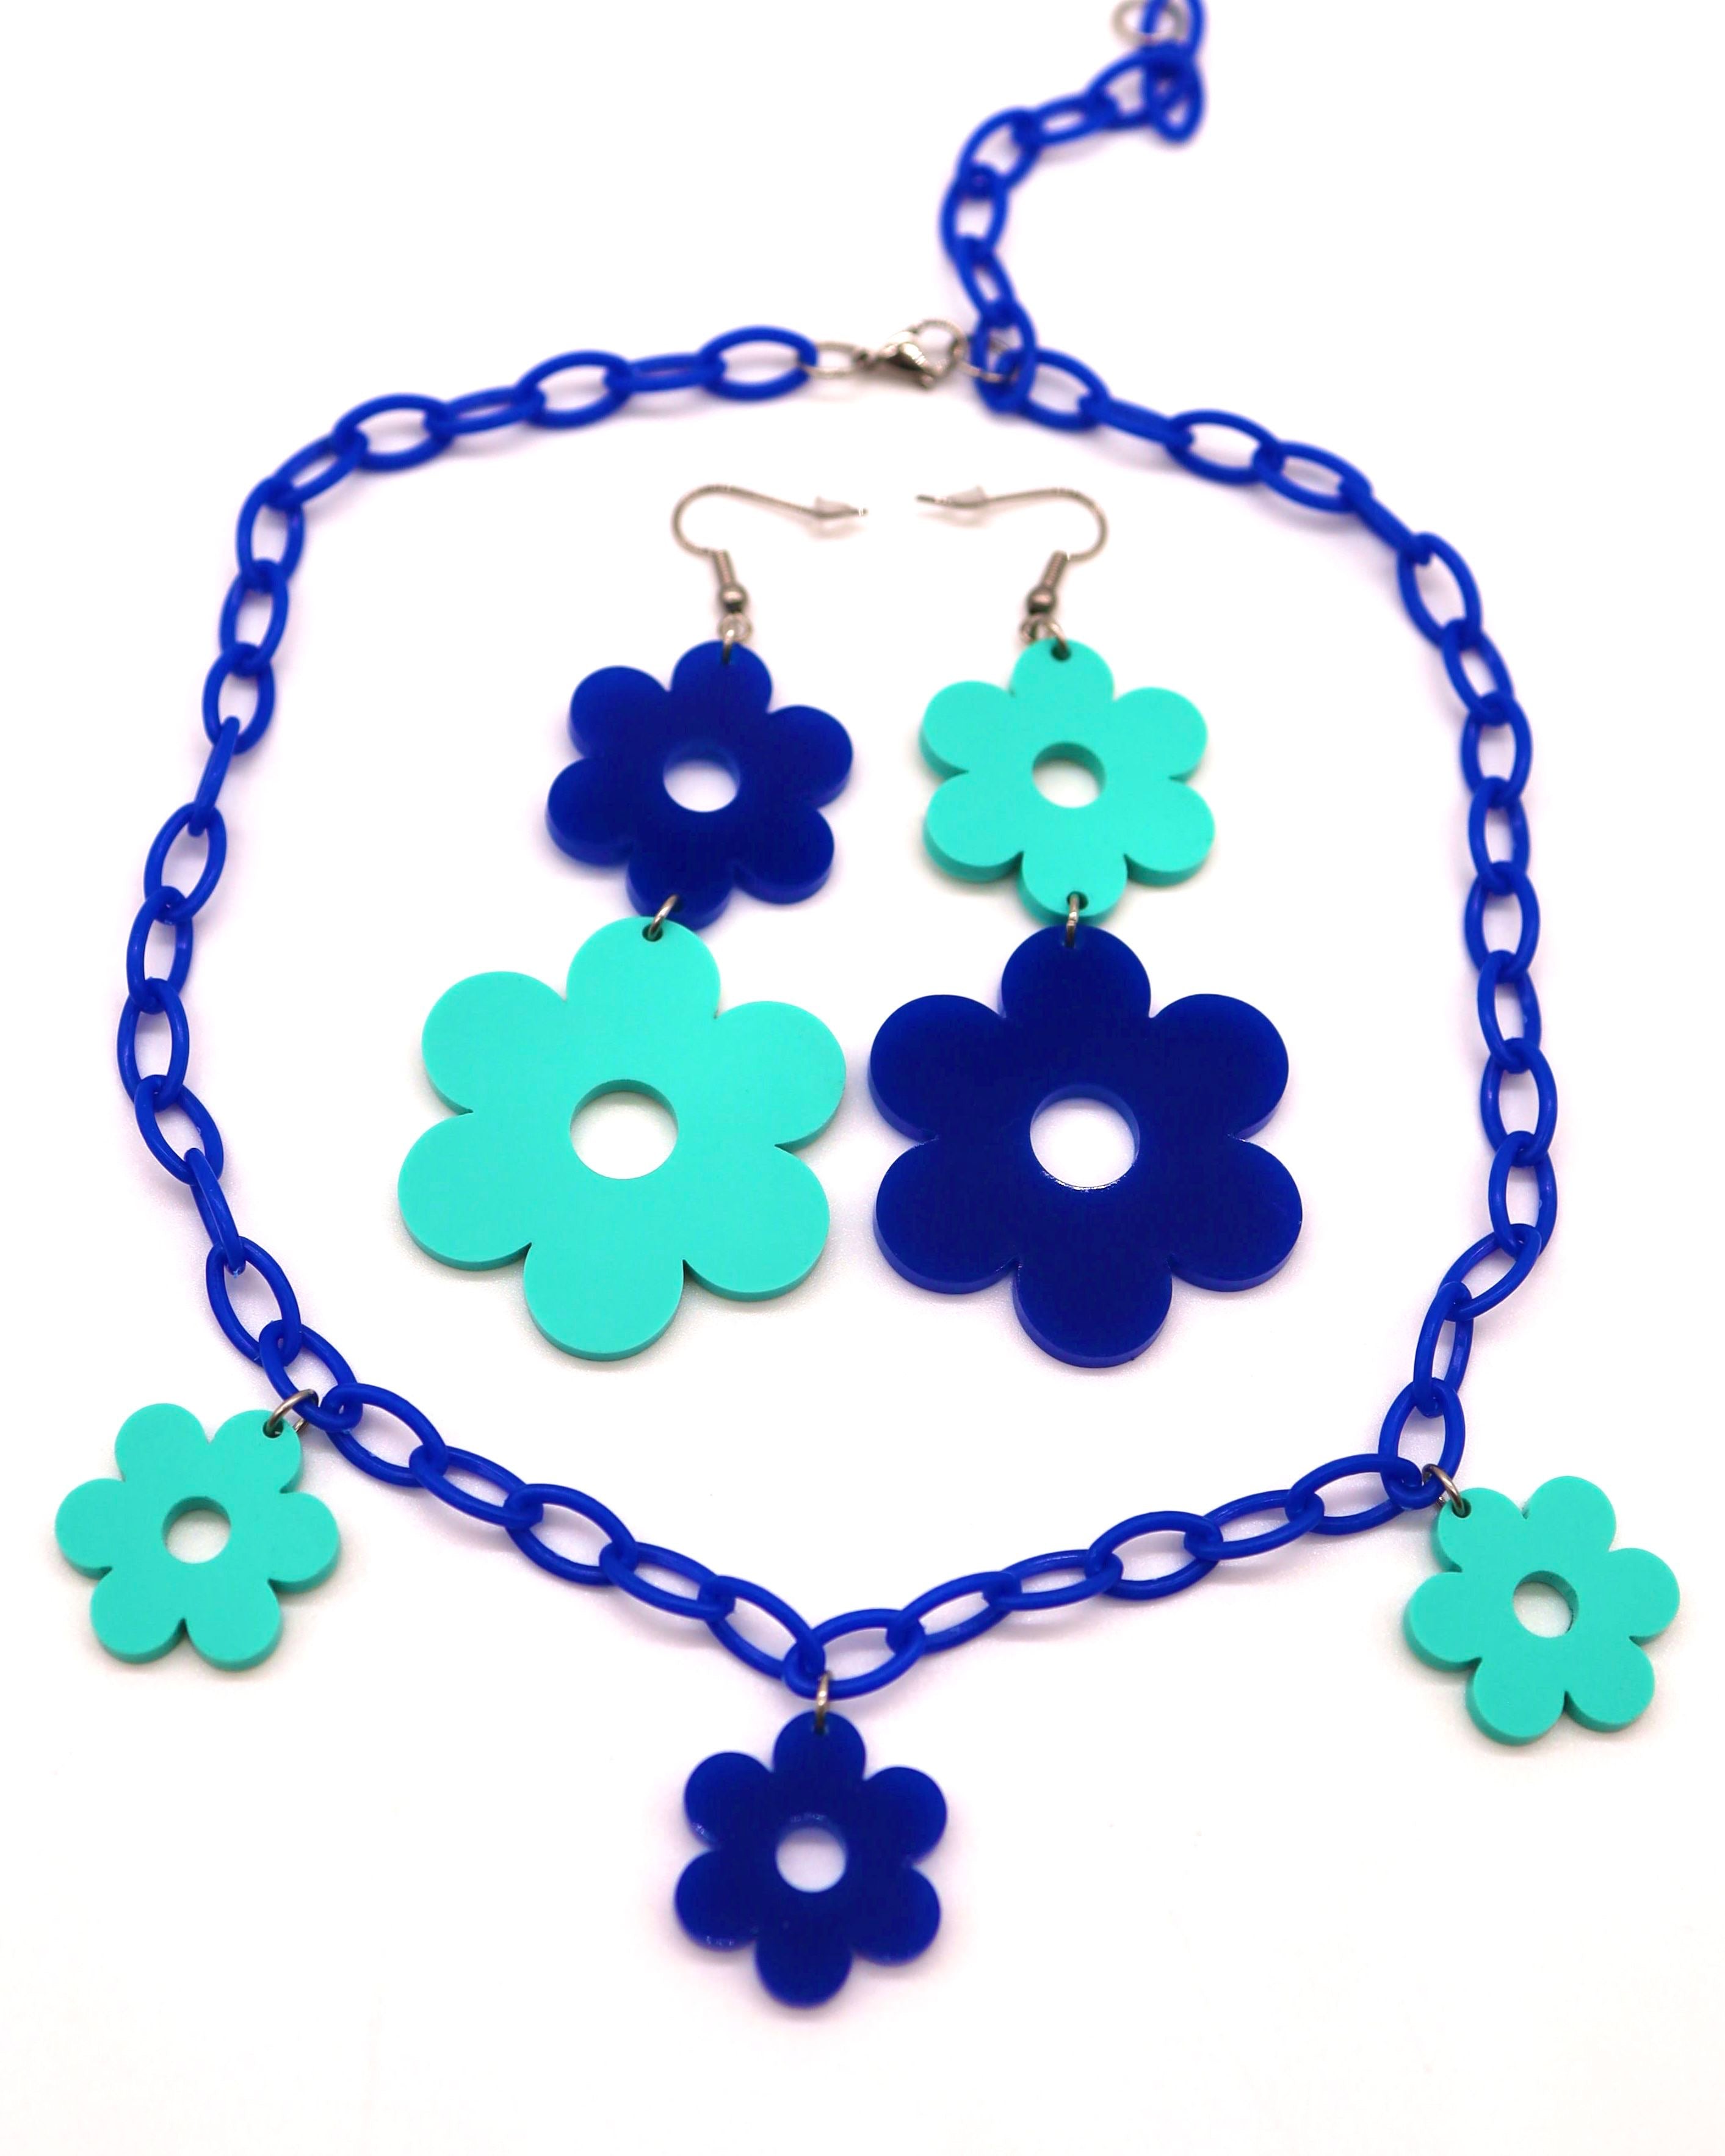 A pair of Flower Power Blue Earrings with the matching Flower Power Blue Necklace.